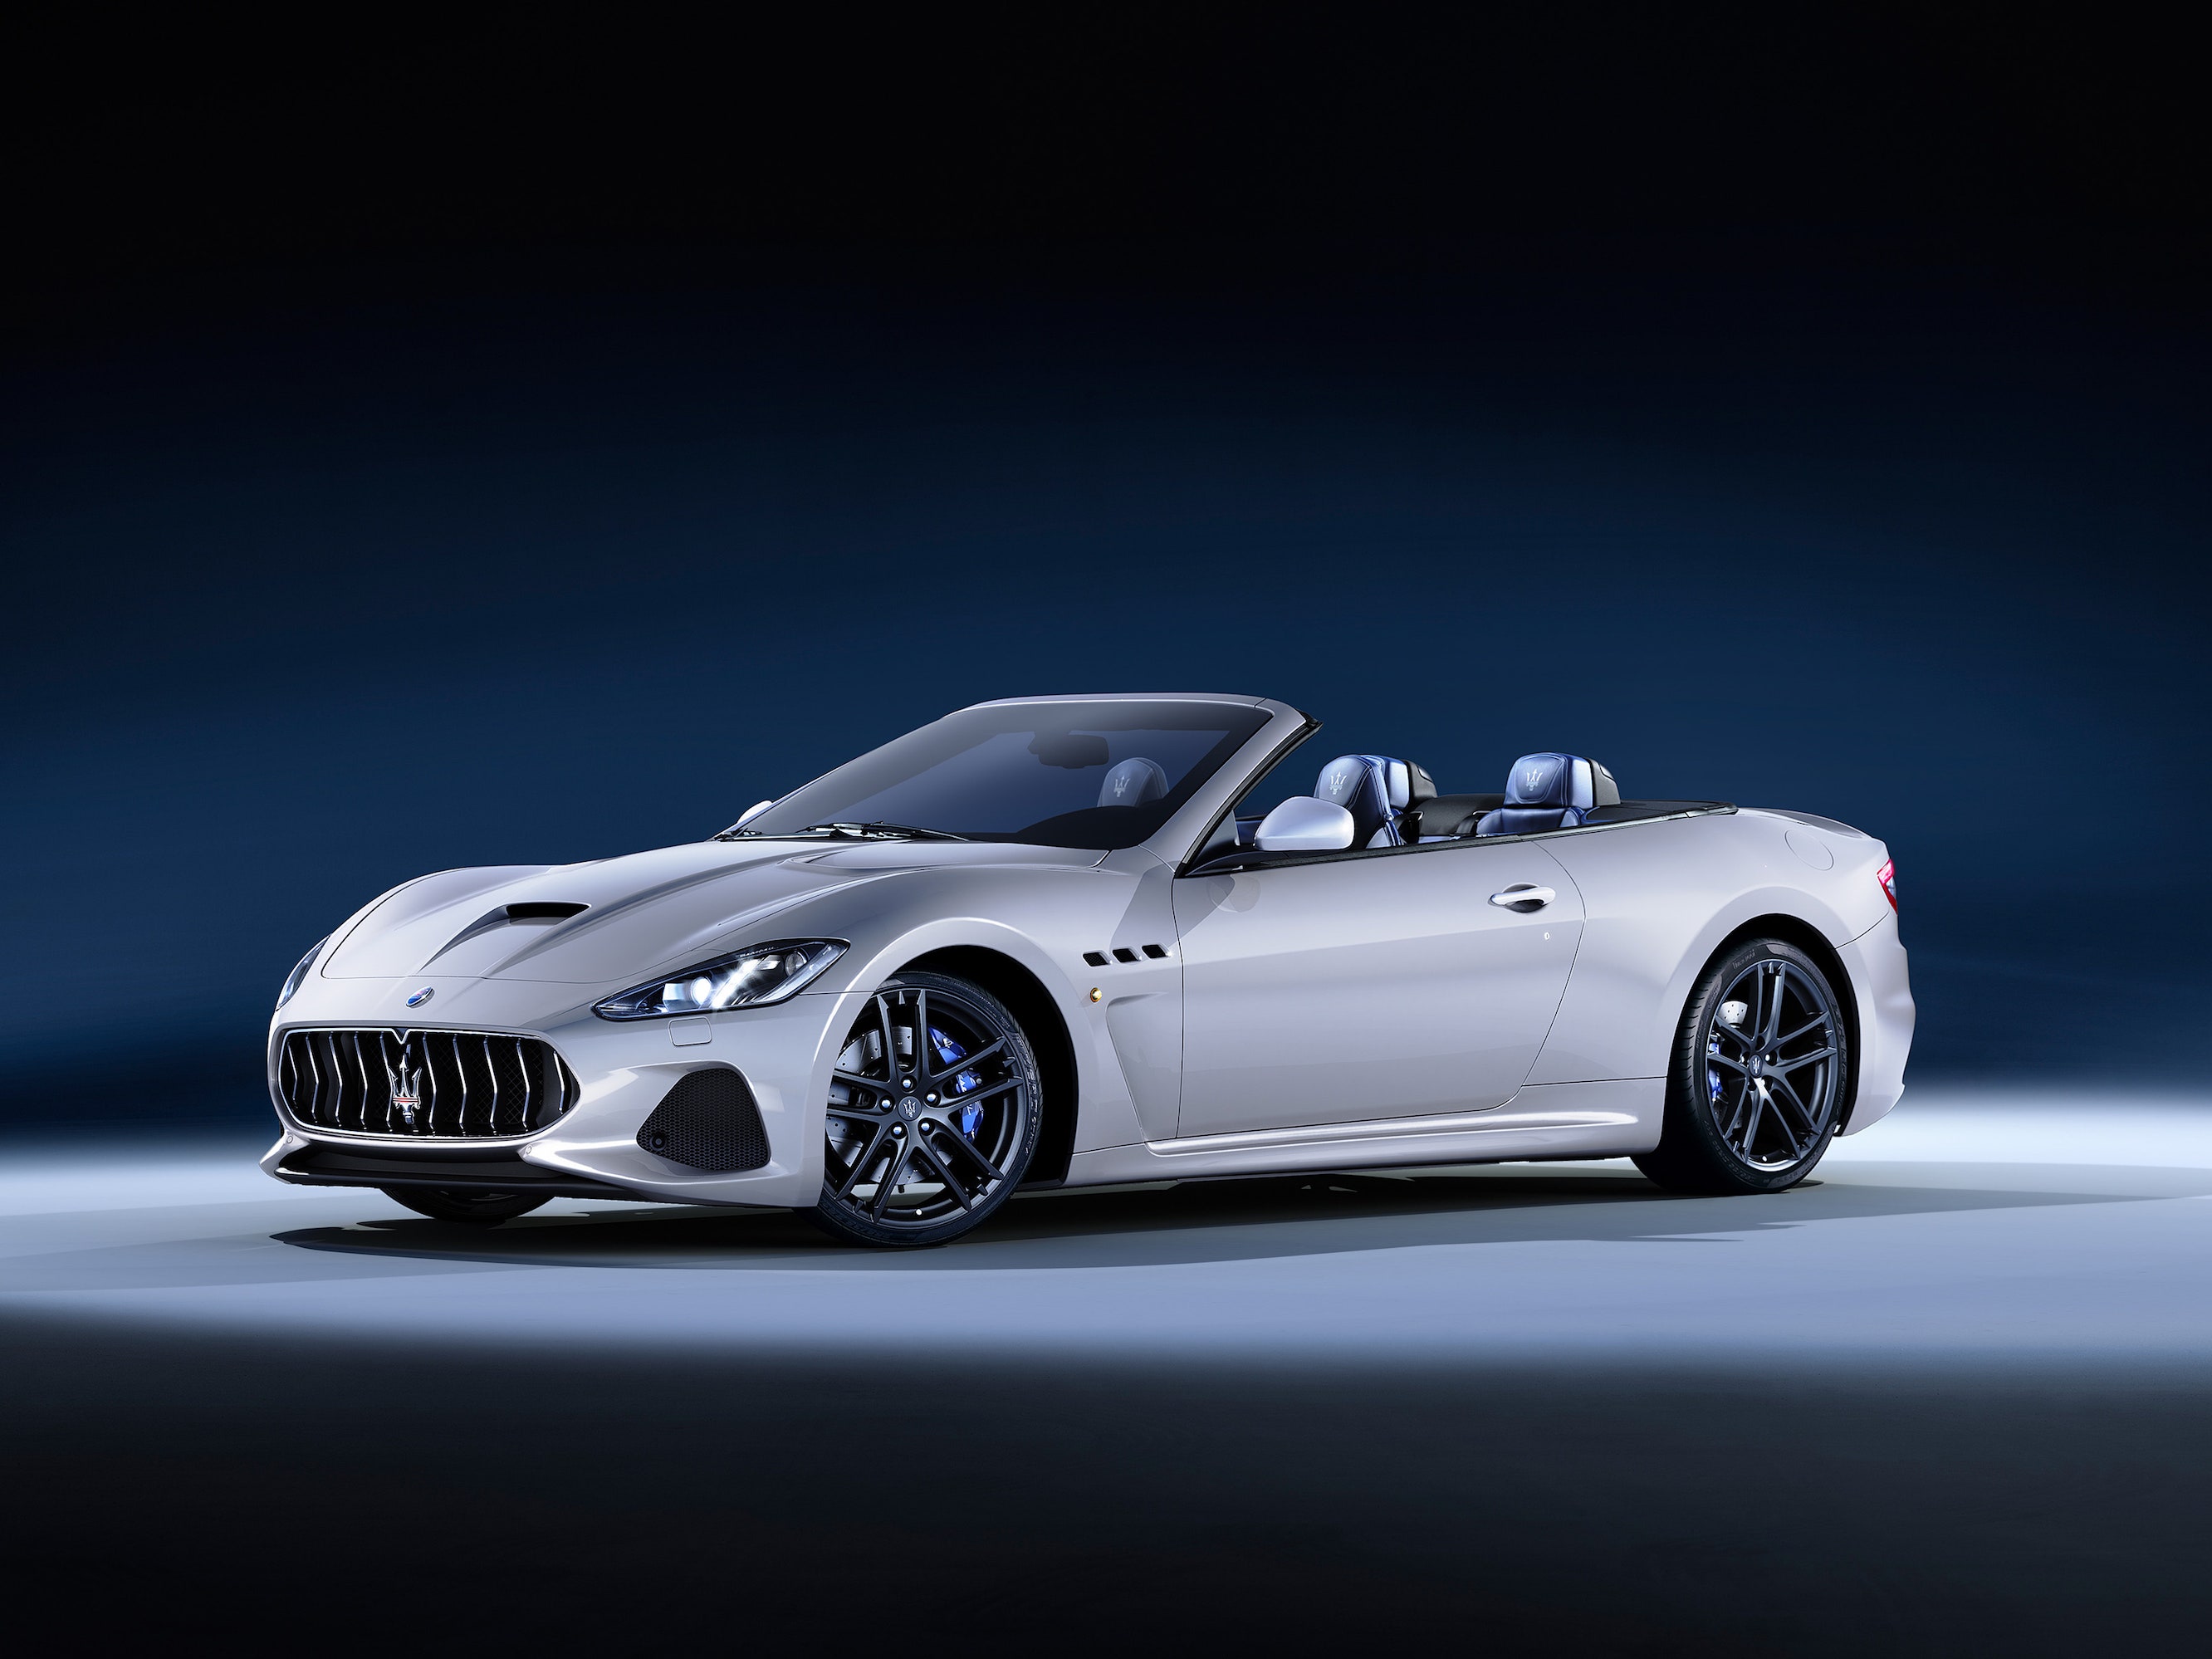 Maserati Unveils Their Stunning New GranTurismo Coupe and Convertible |  Architectural Digest